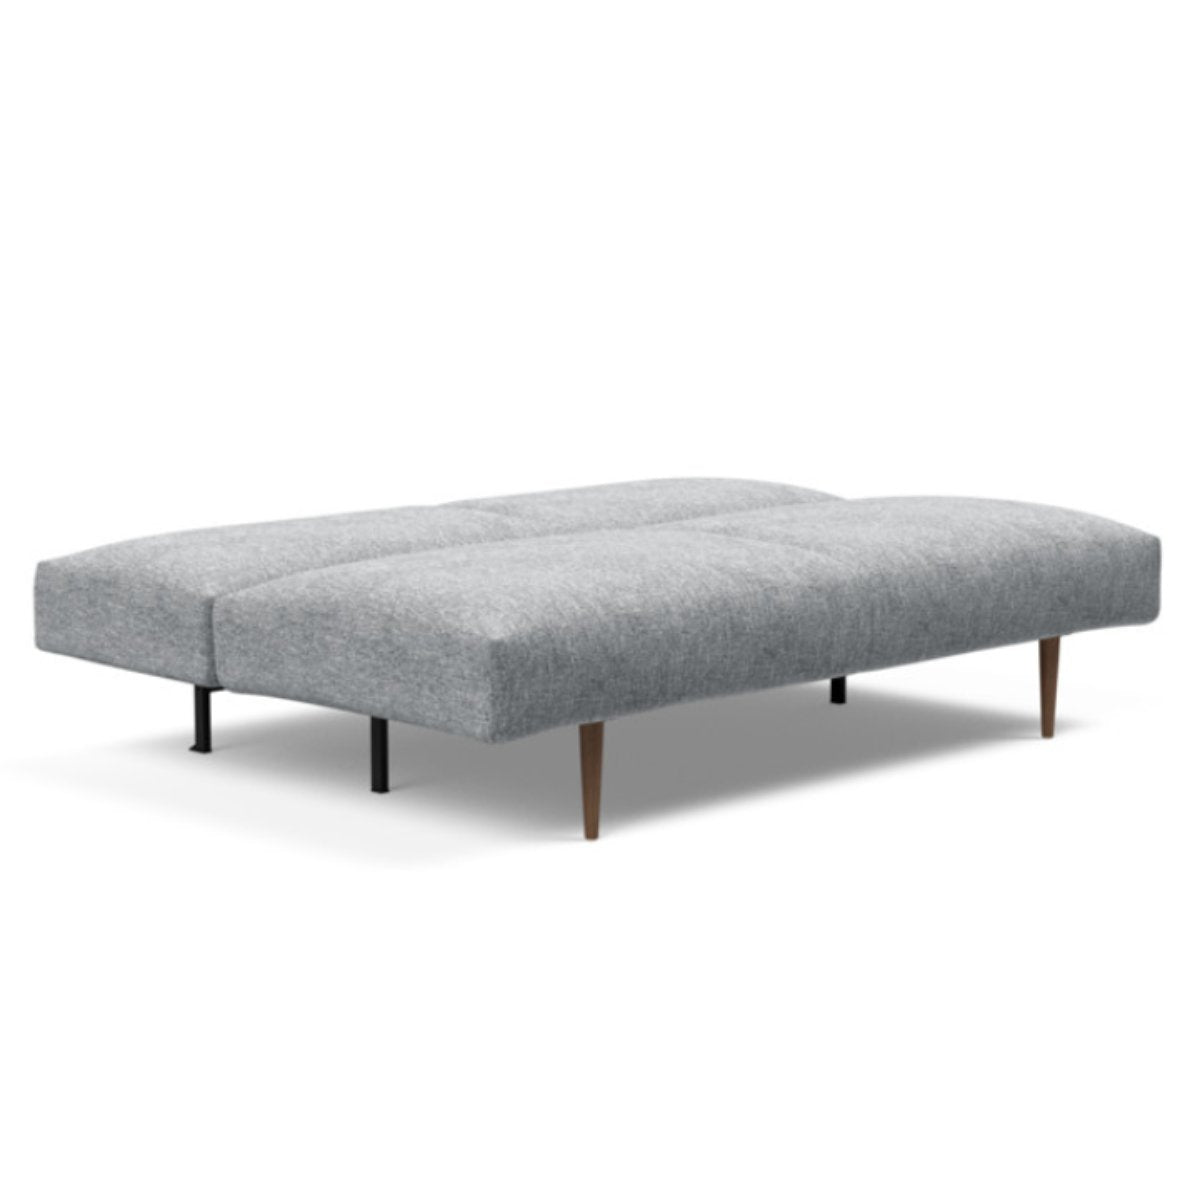 Frode Dark Styletto Sofa Bed Sofa Beds INNOVATION     Four Hands, Burke Decor, Mid Century Modern Furniture, Old Bones Furniture Company, Old Bones Co, Modern Mid Century, Designer Furniture, https://www.oldbonesco.com/